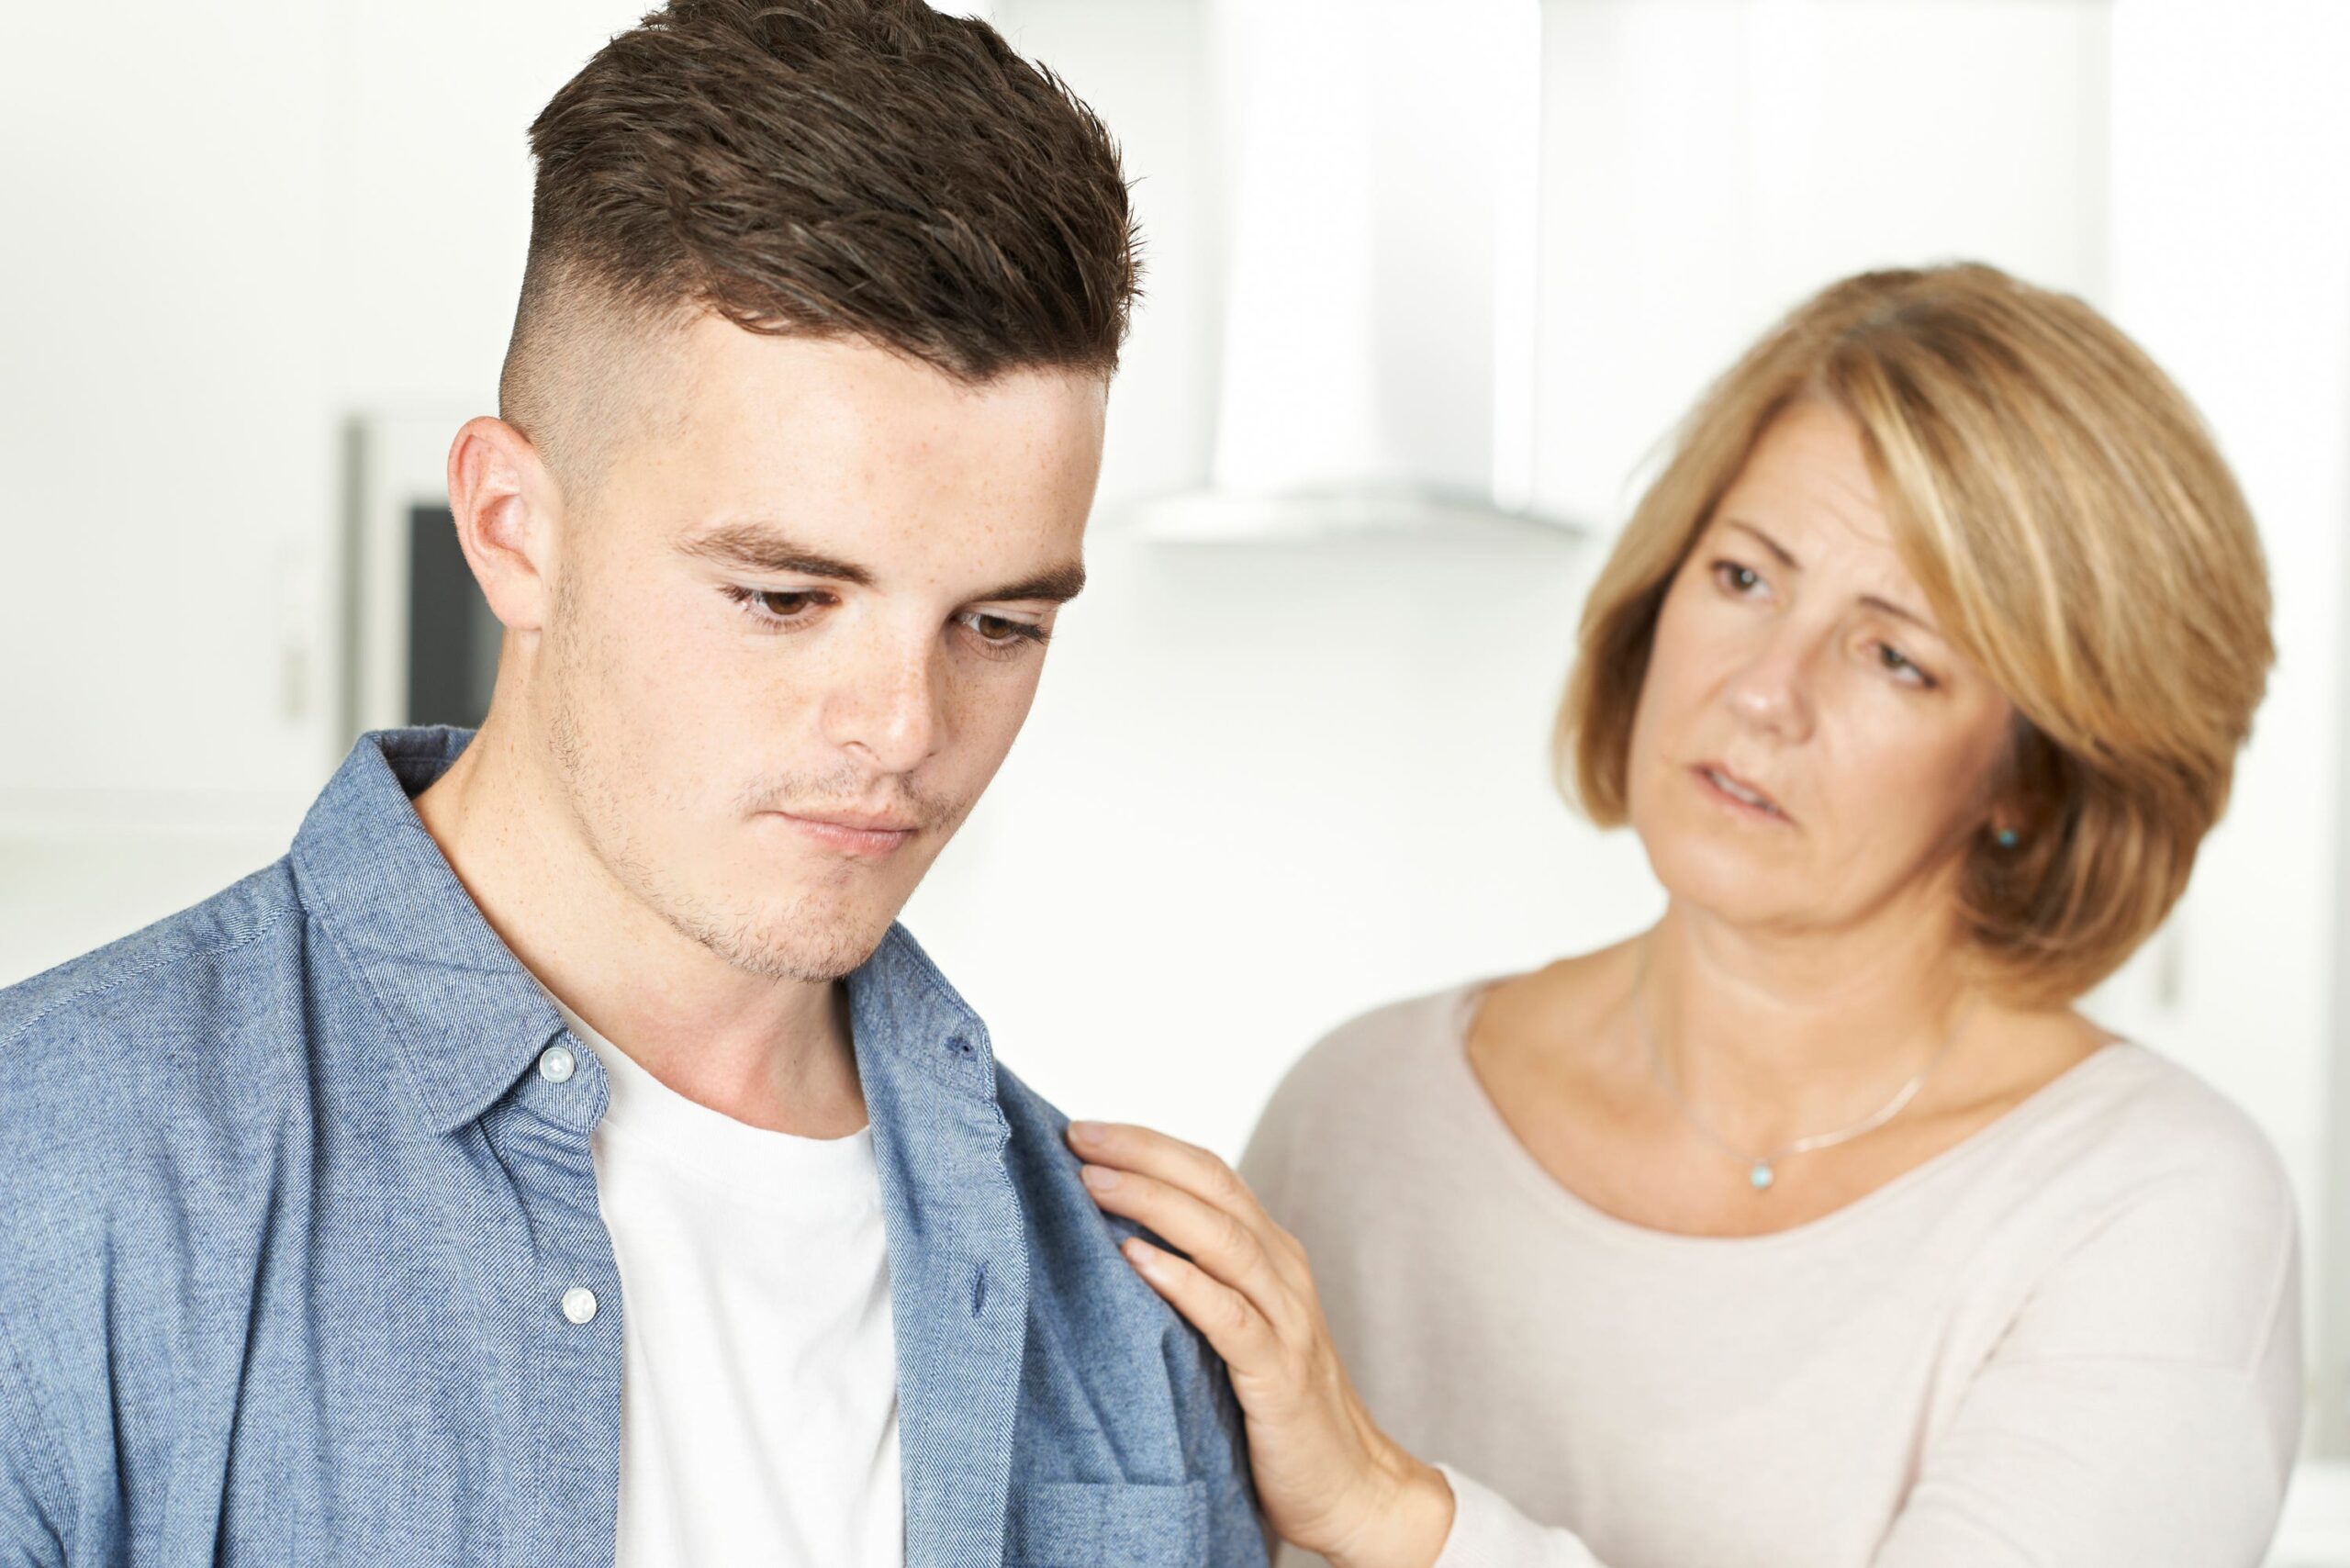 My 18-year-old son has a drinking problem – what should i do?